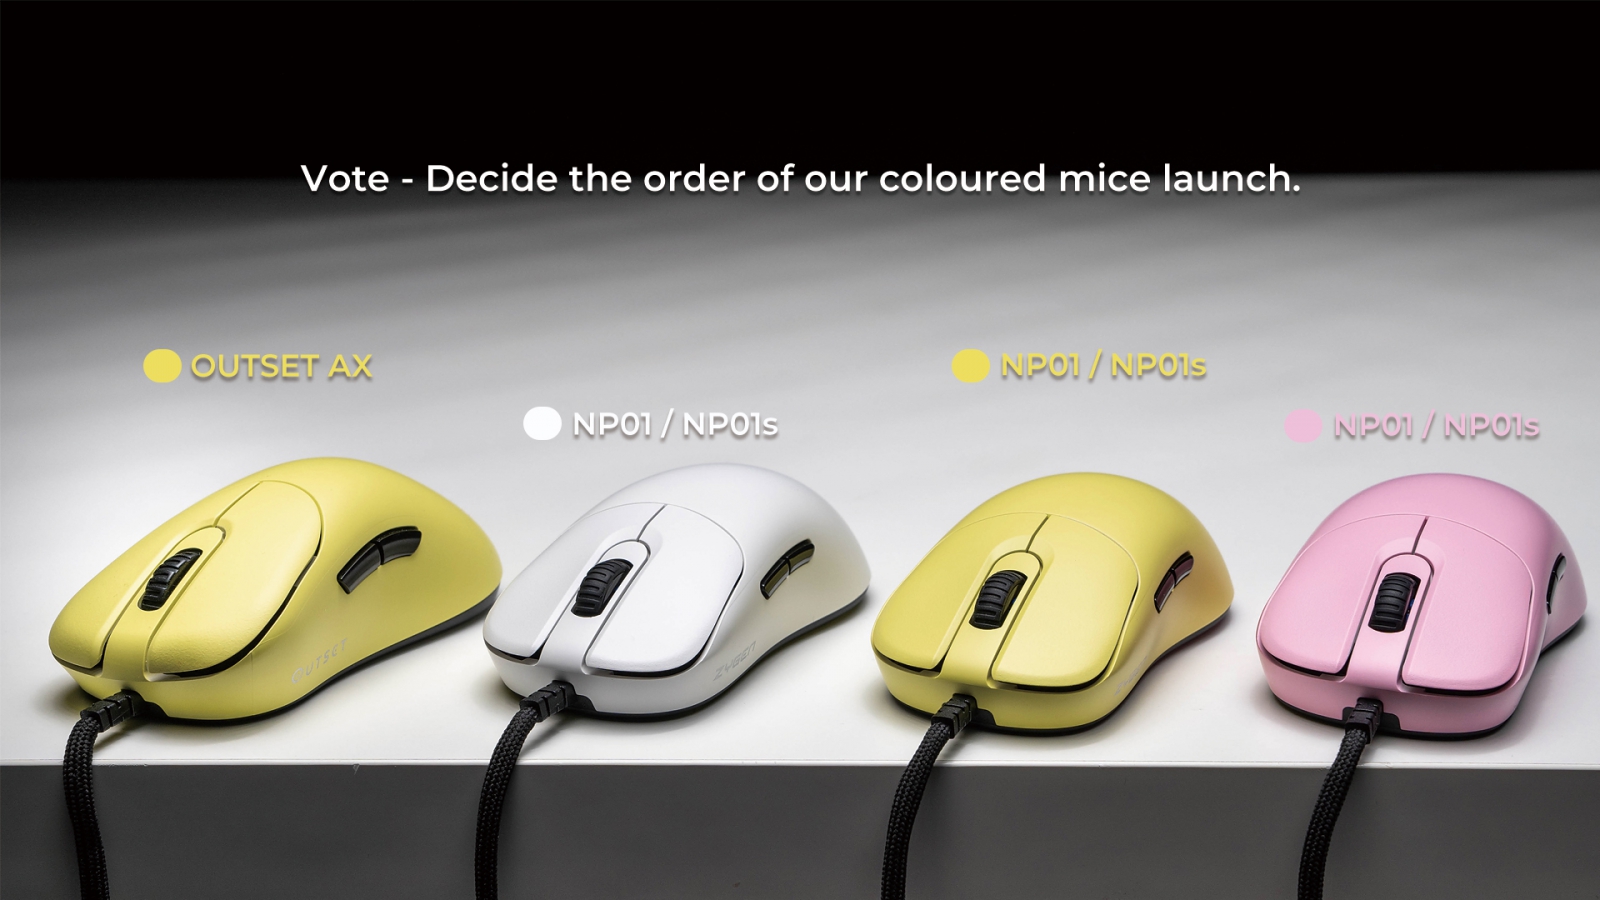 Vote - Decide the order of colours for our mice launch